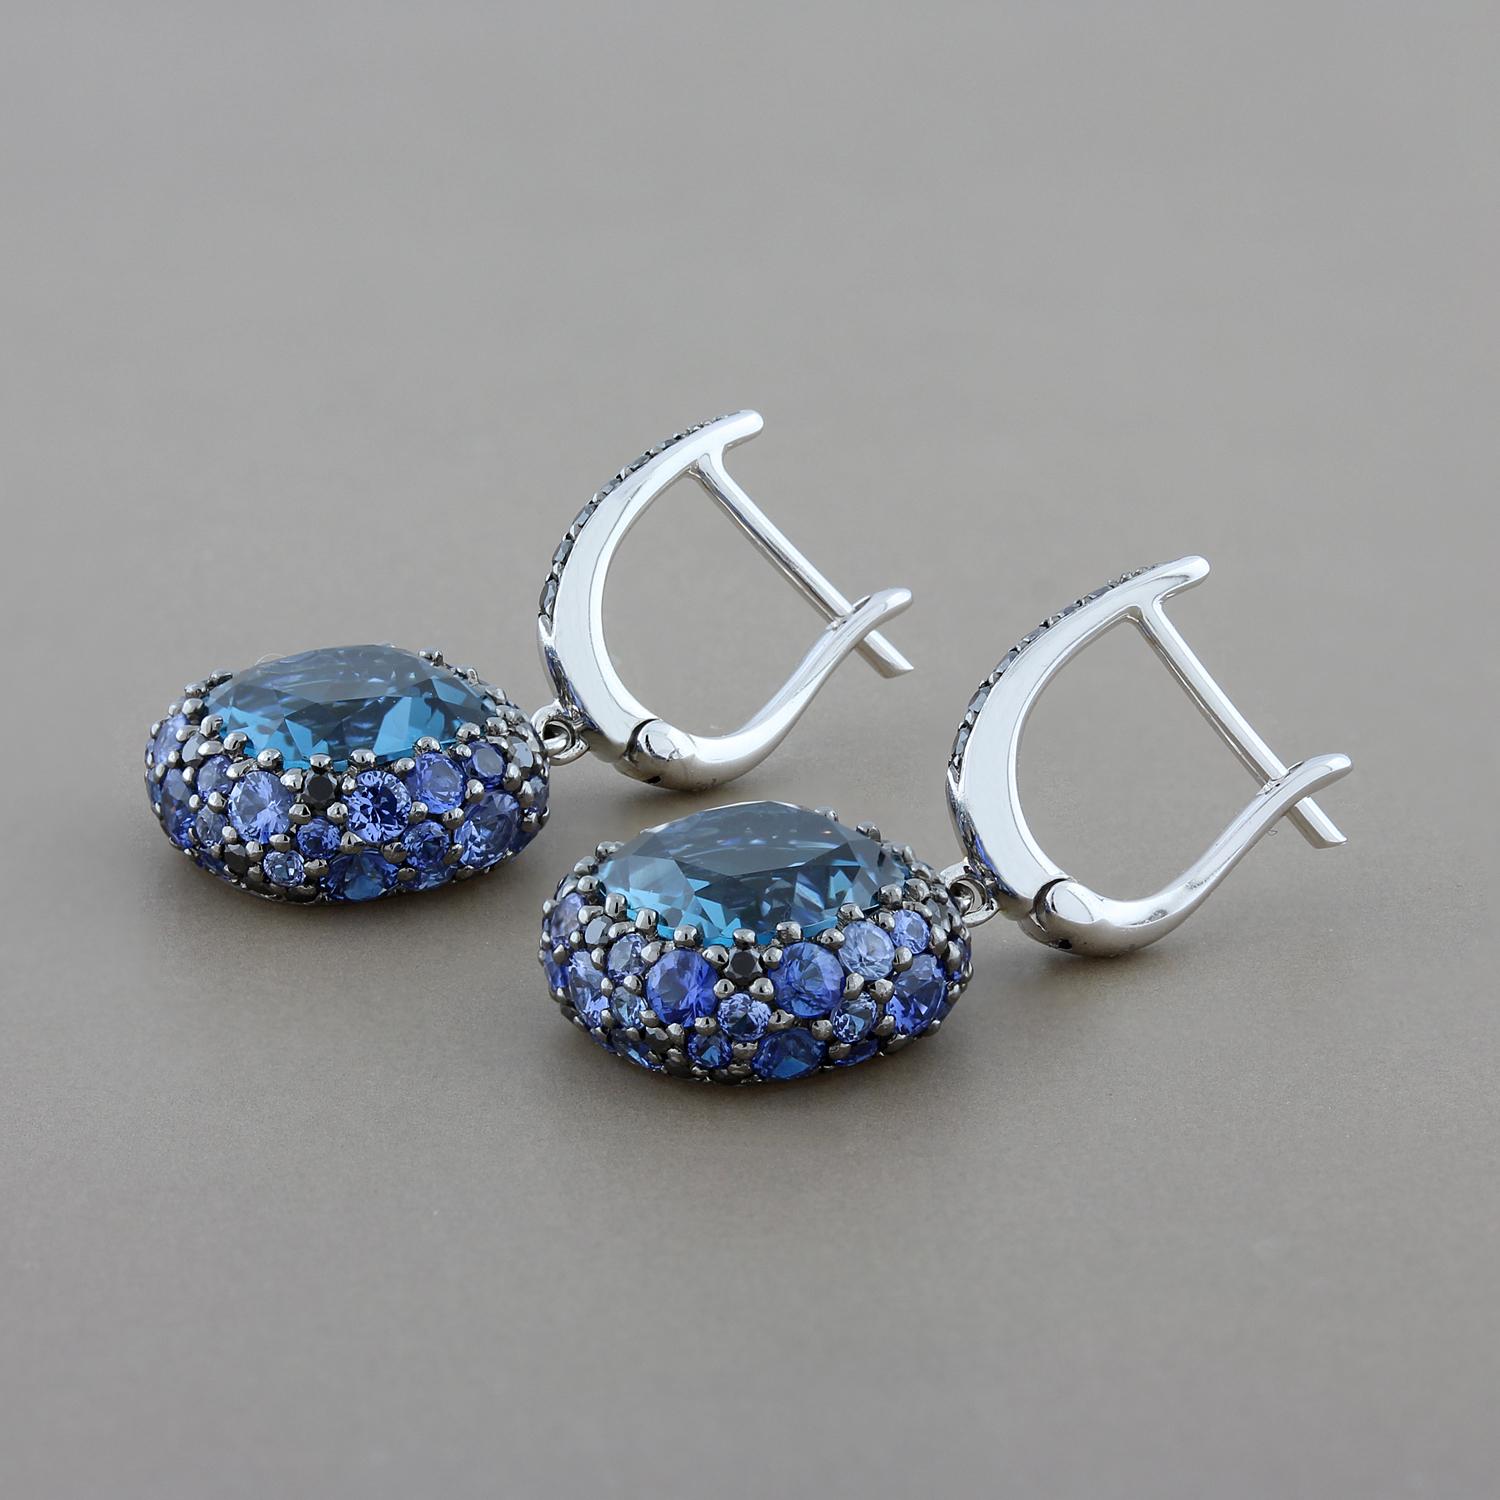 I’m blue! Feel beautiful in these drop earrings featuring 6.20 carats of London blue topaz surrounded by a cluster of 2.98 carats of sapphire and 0.50 carats of black diamonds. Set in 18K white gold, a lovely piece that can be worn every